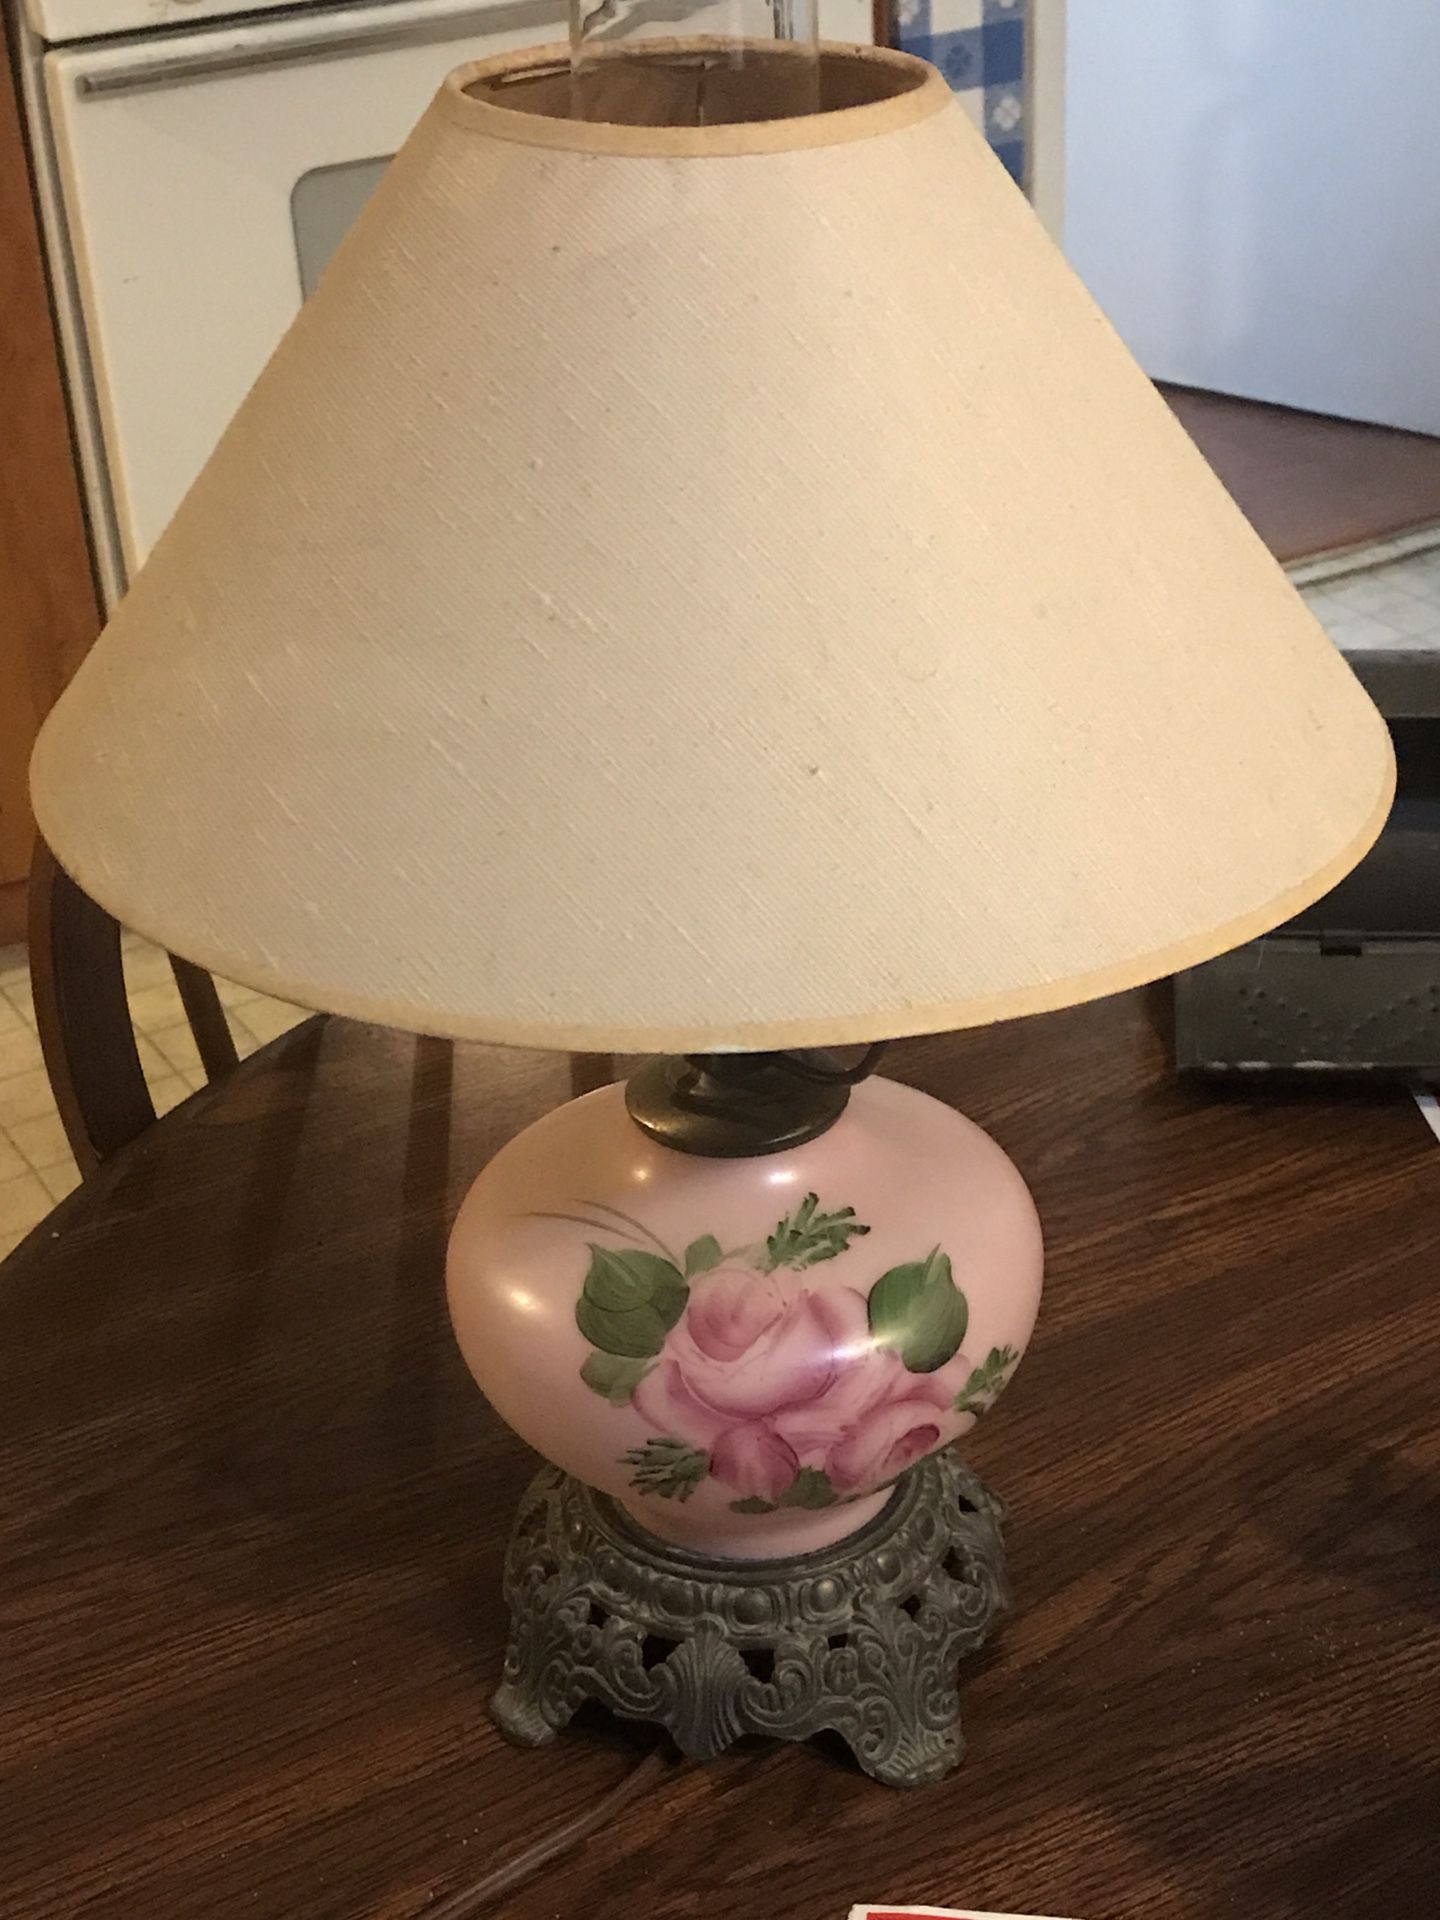 Antique Flowered Electric Hurricane Lamp